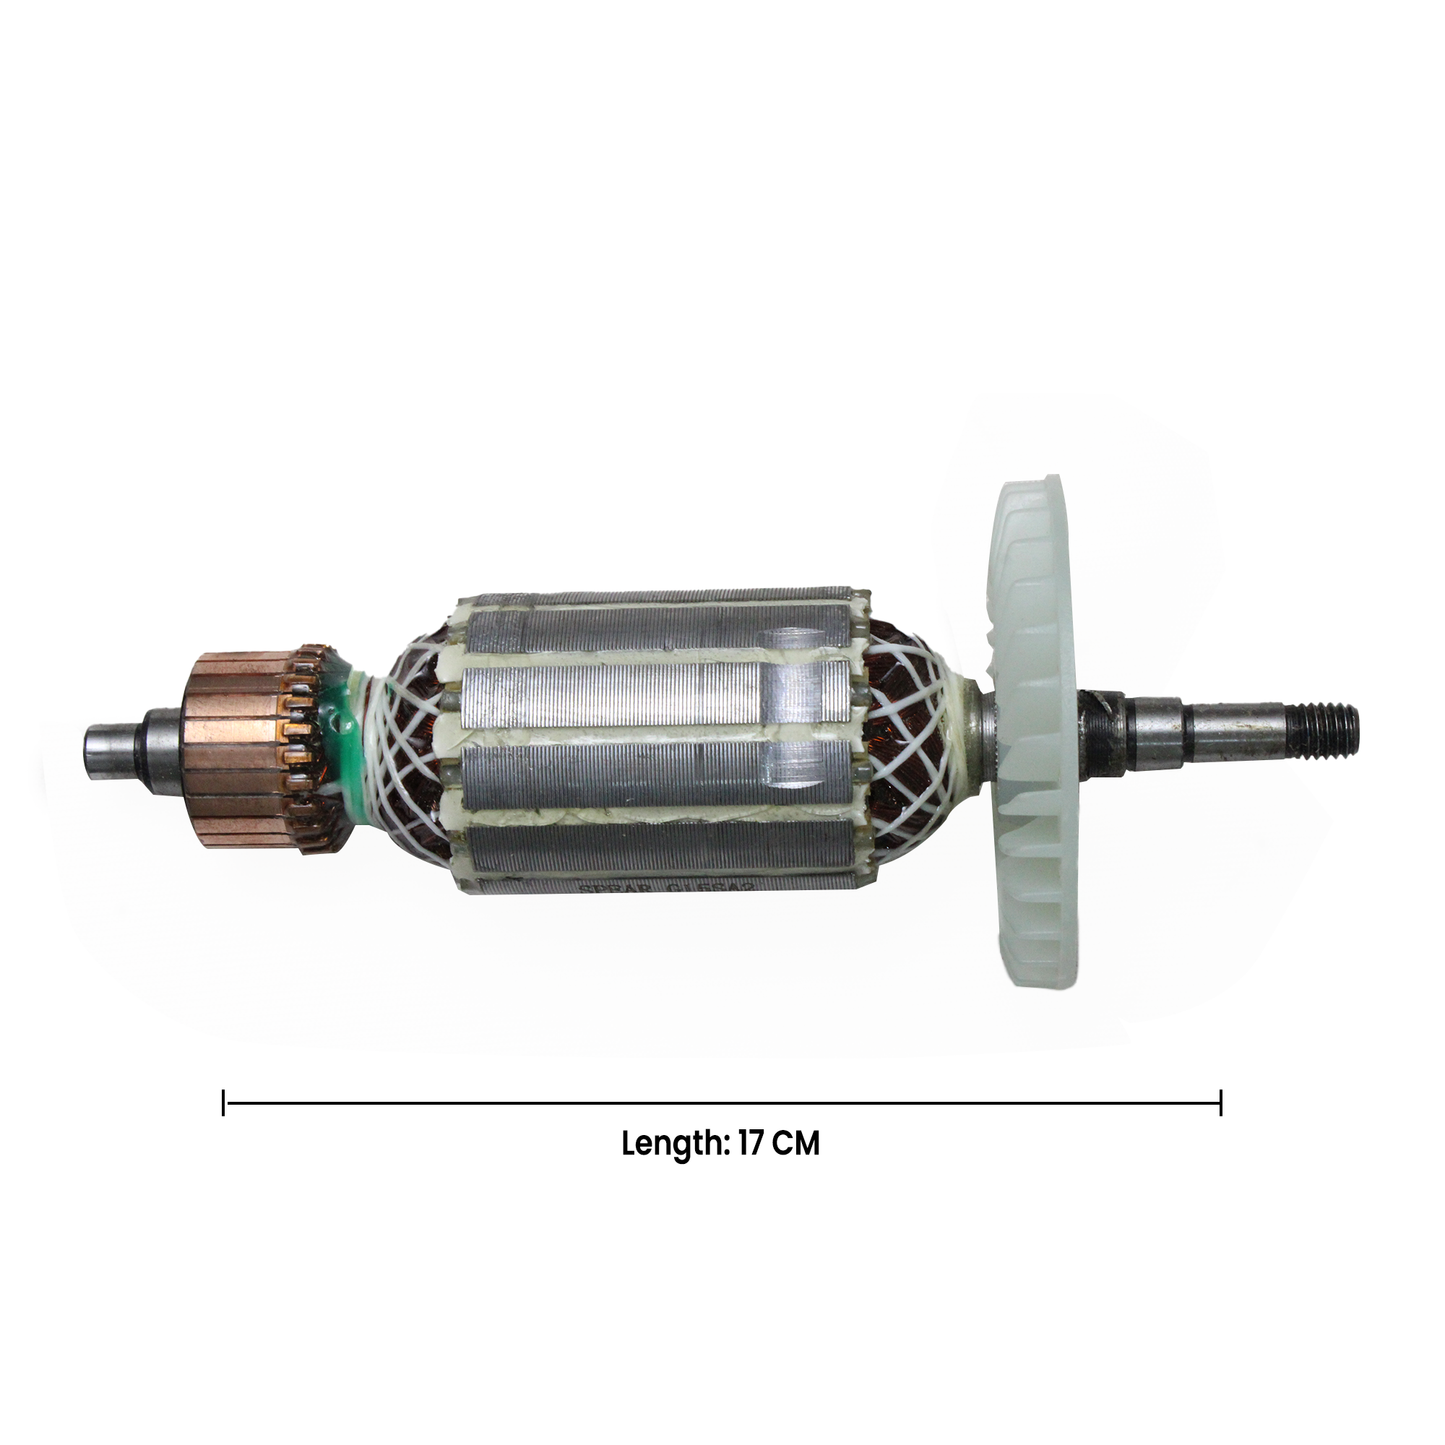 AEGON ACWFG15SA2 Copper Armature - Replacement for HiKOKI (Hitachi) G15SA2 and Compatible with Other Brands & Generic Models